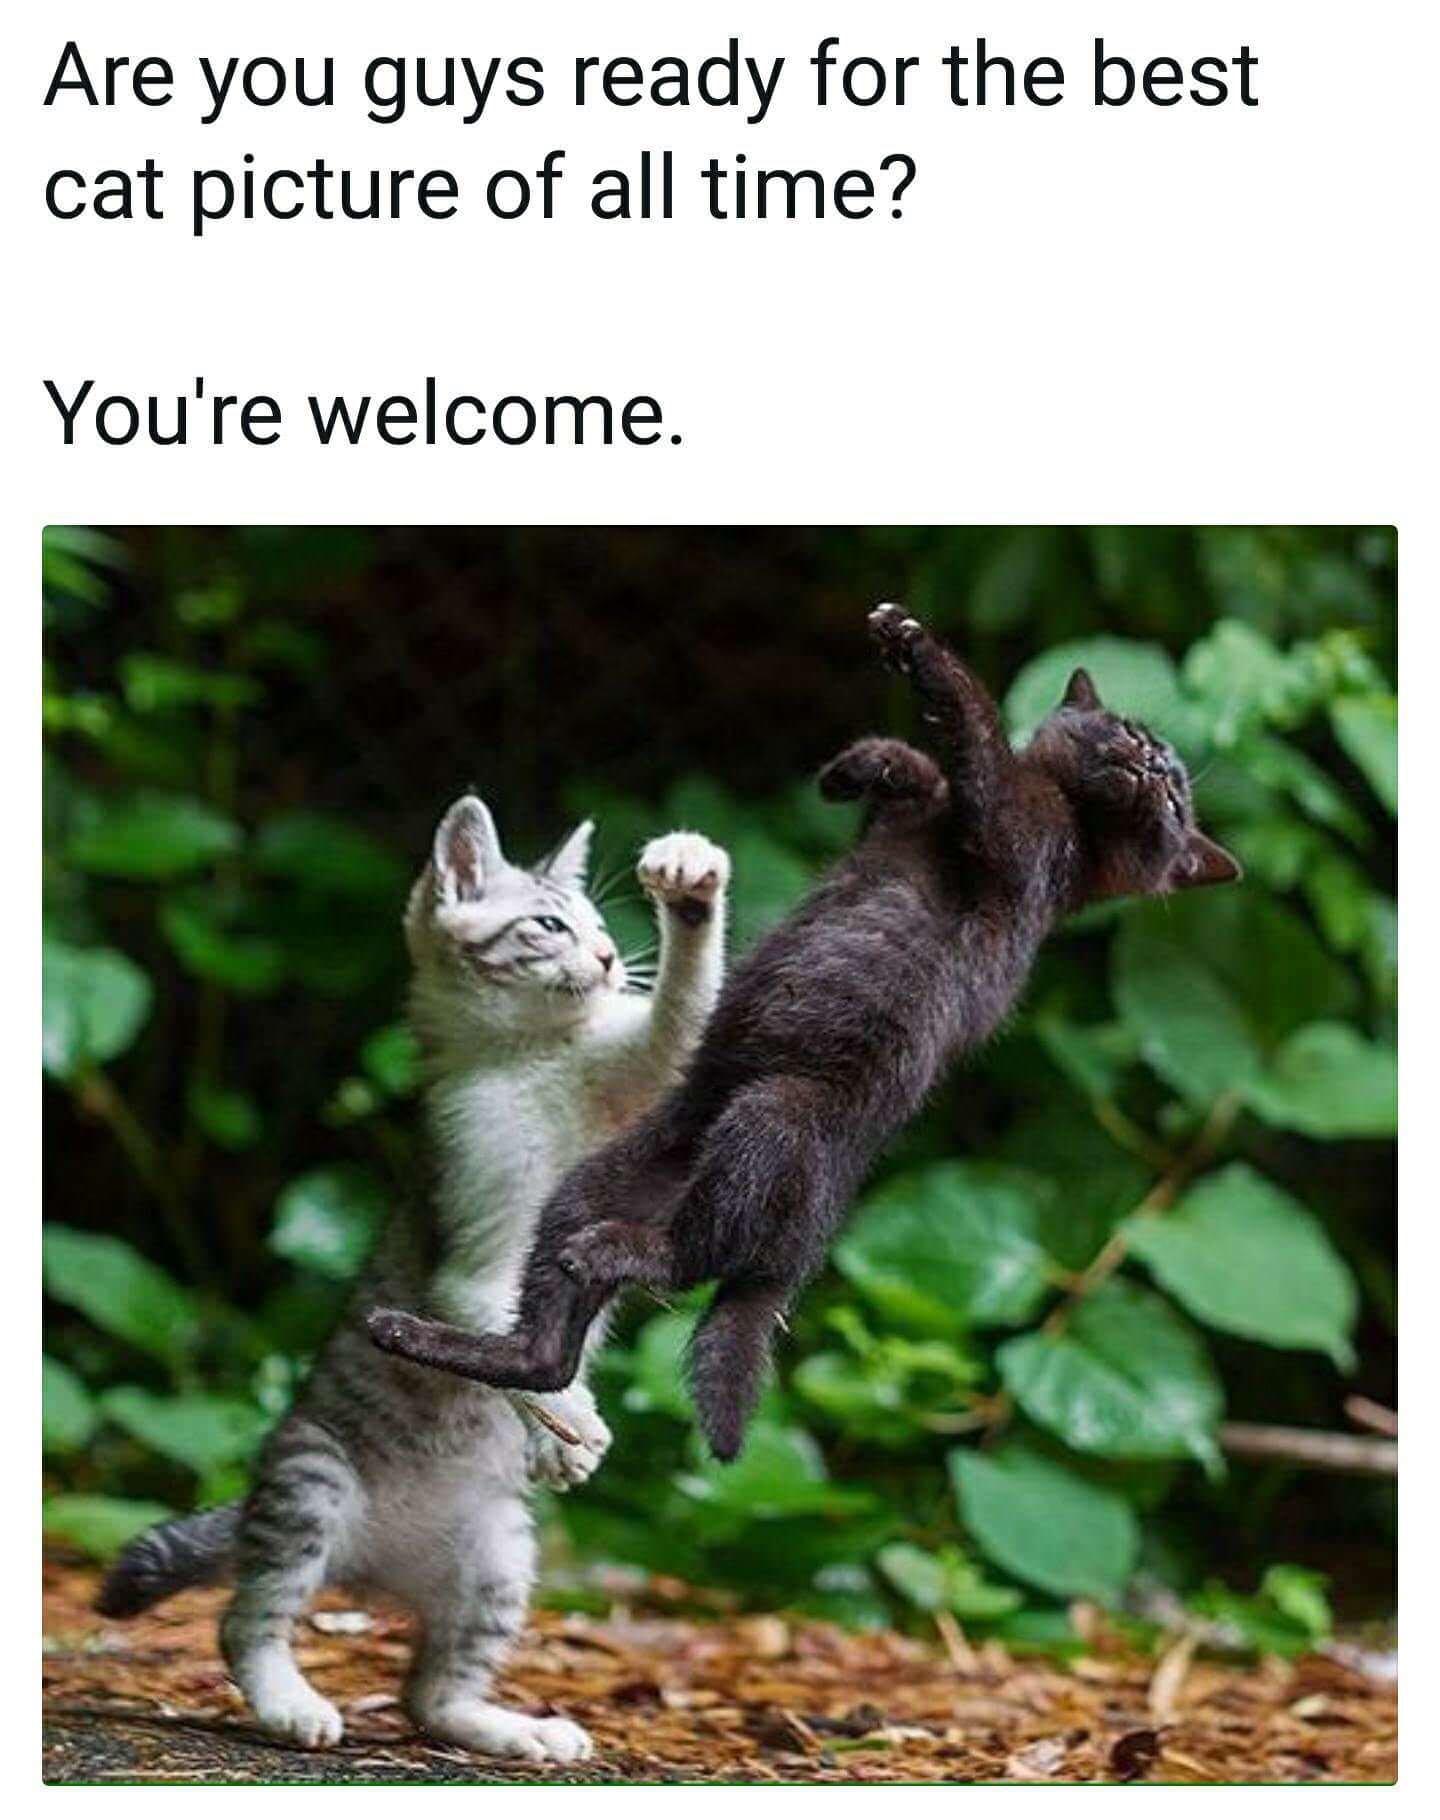 cat fighting meme - Are you guys ready for the best cat picture of all time? You're welcome.